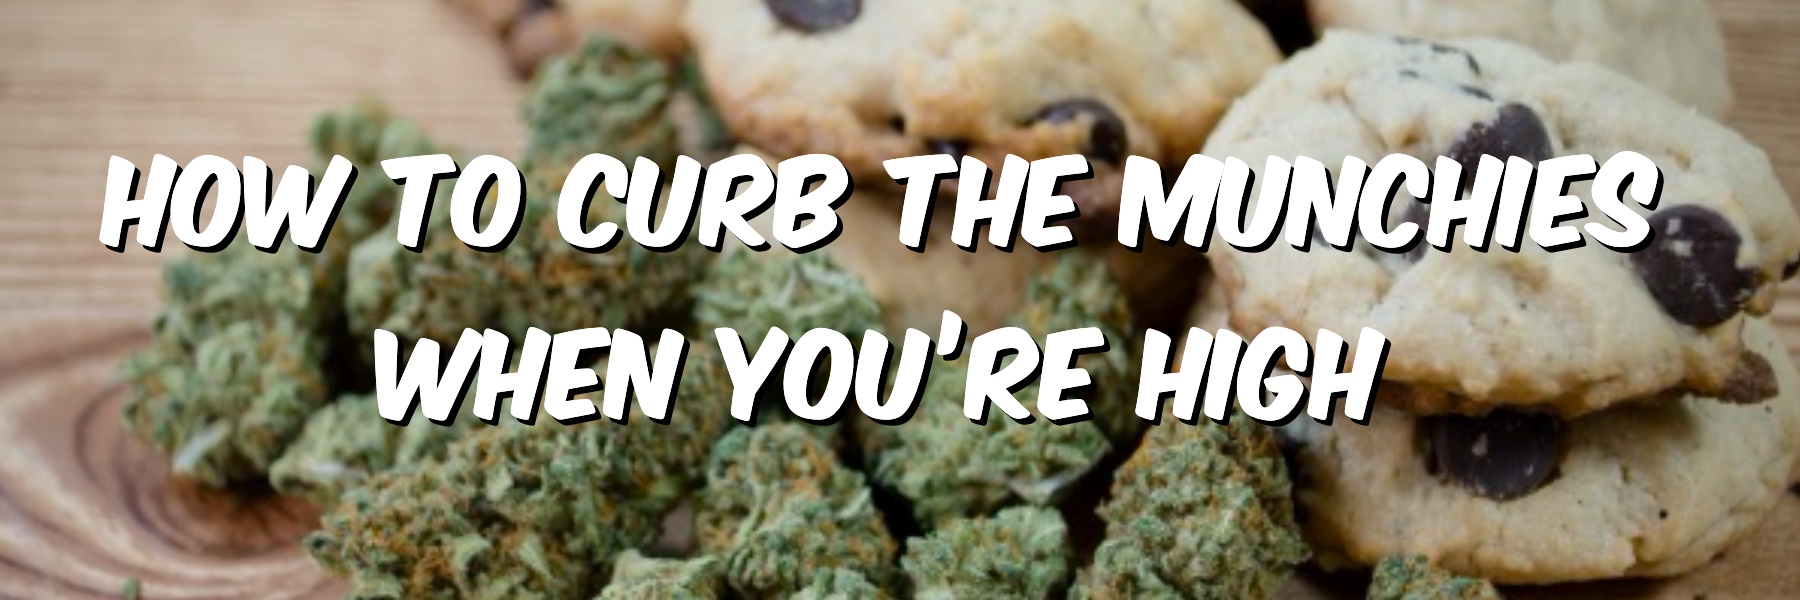 how to curb the munchies when you're high